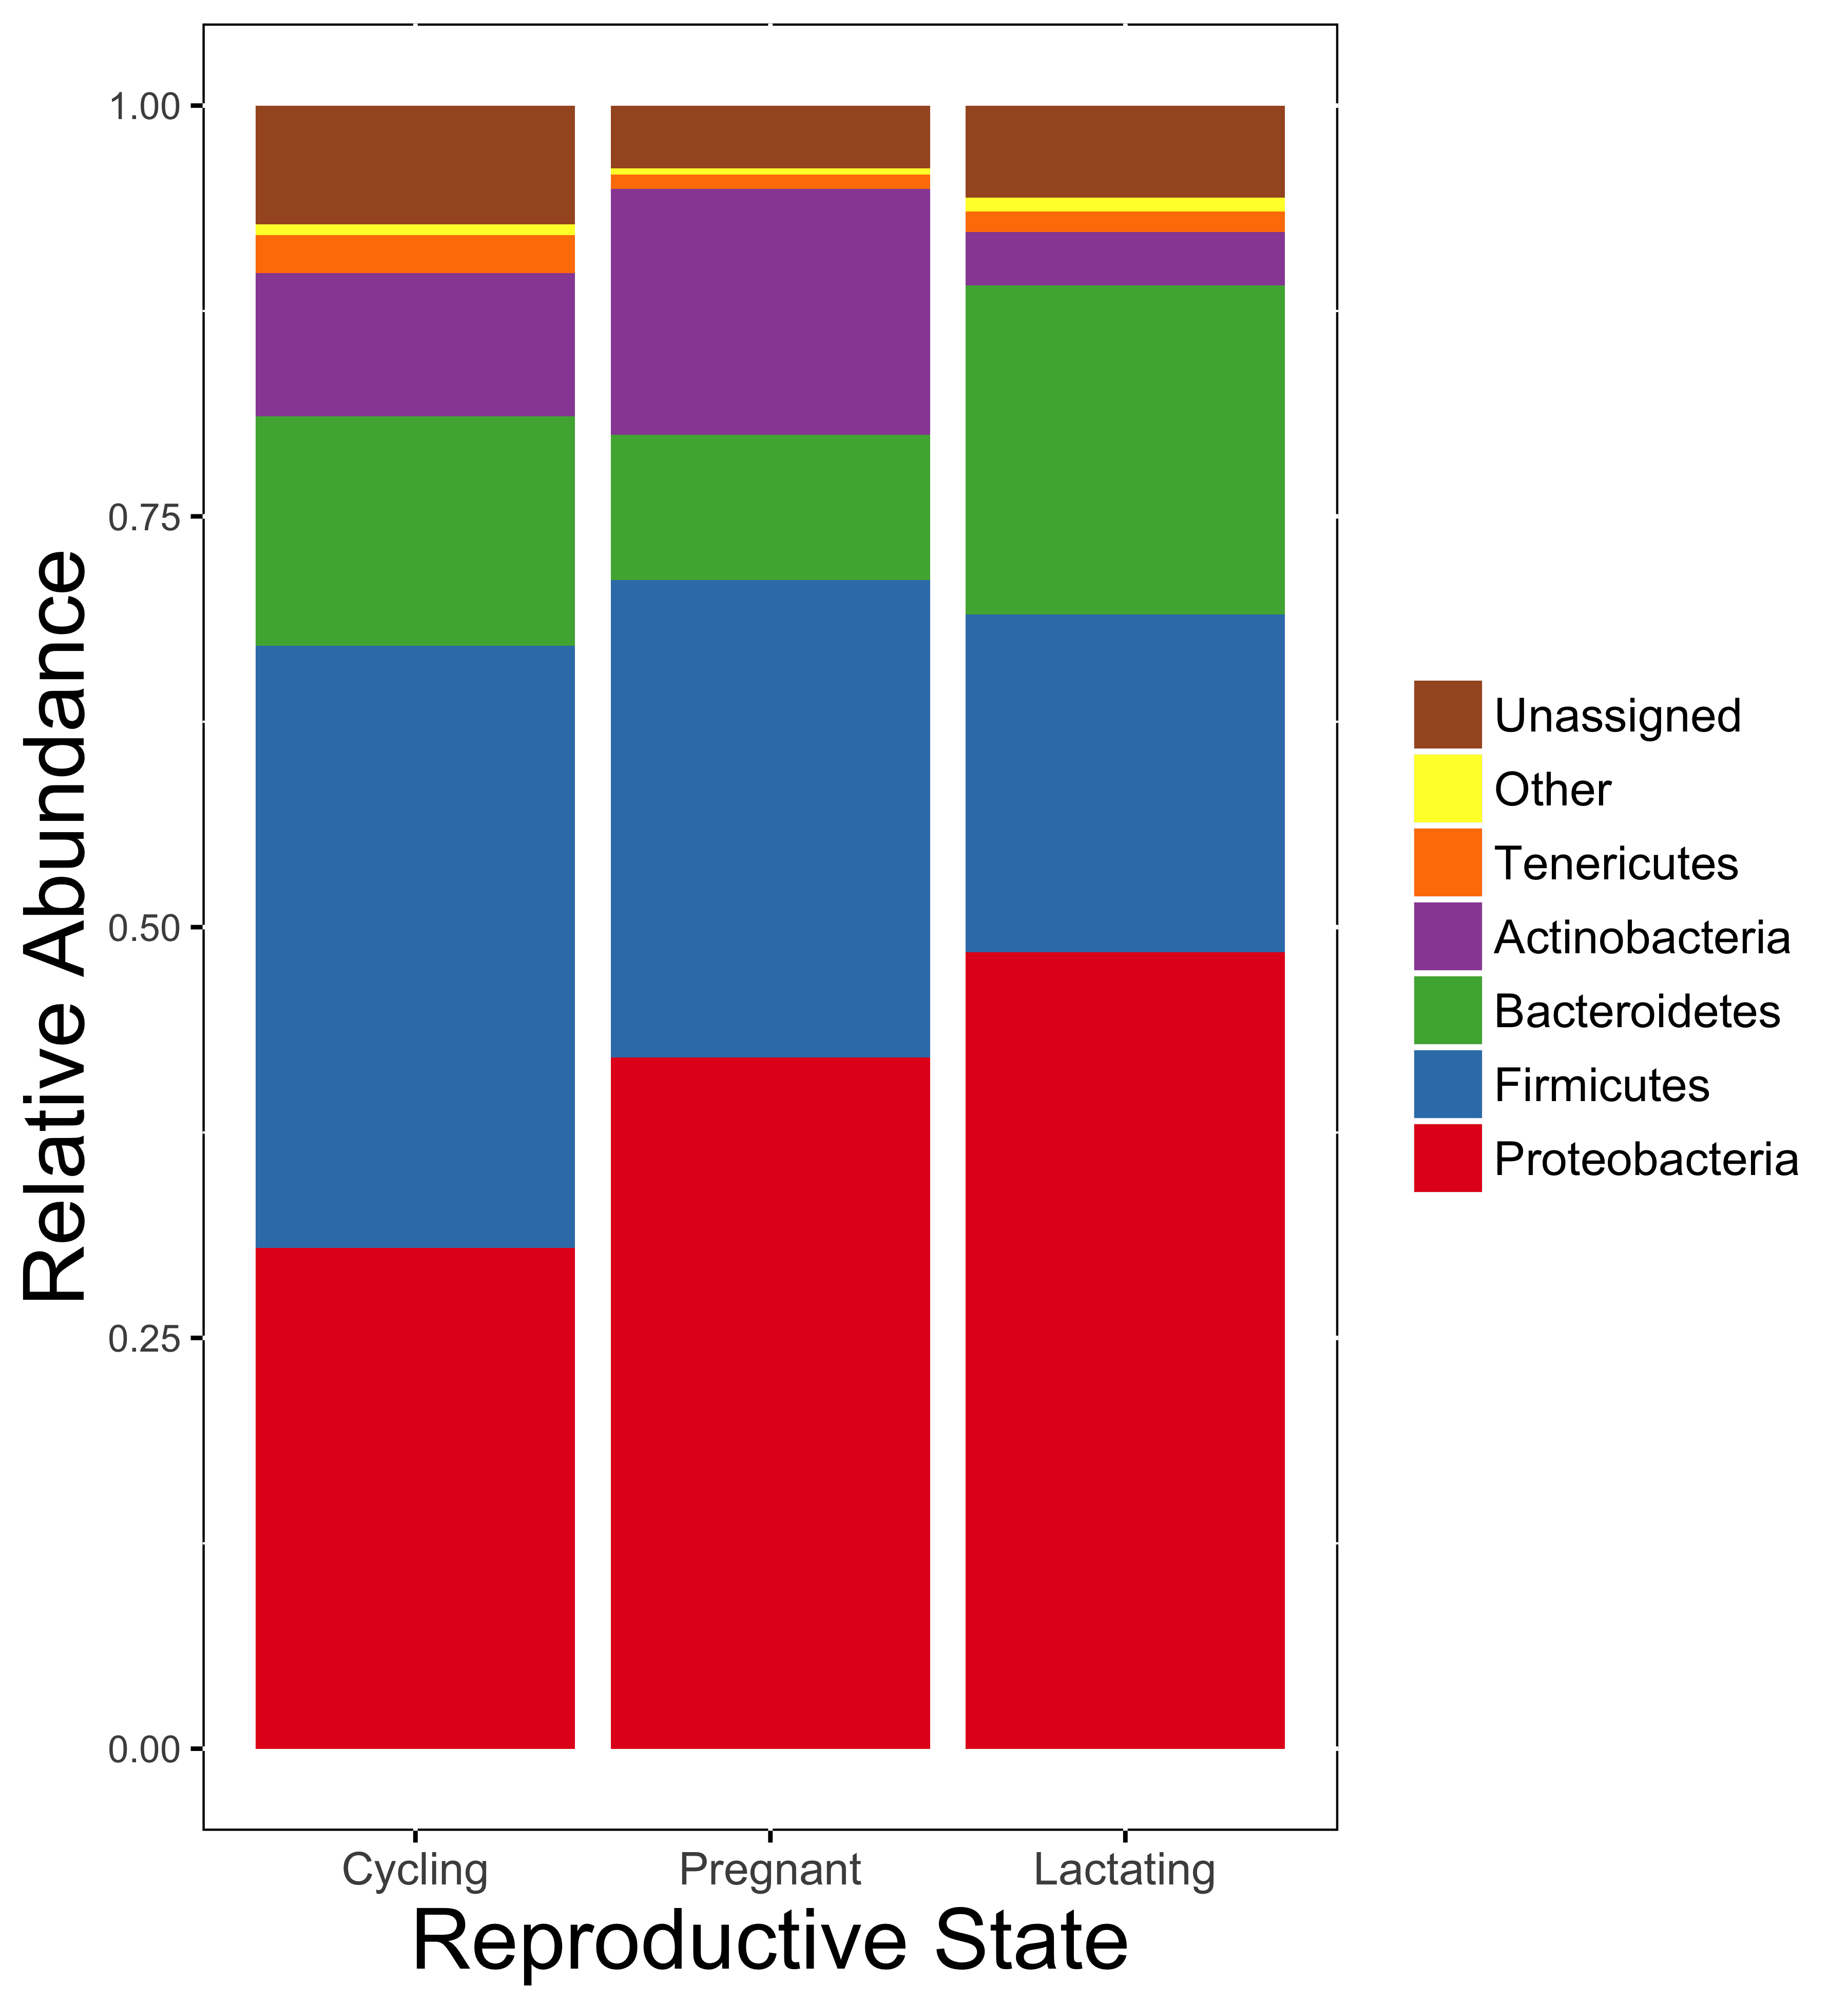 Stacked bar chart showing the differences in the relative abundance of phyla of bacteria between cycling, pregnant, and lactating females